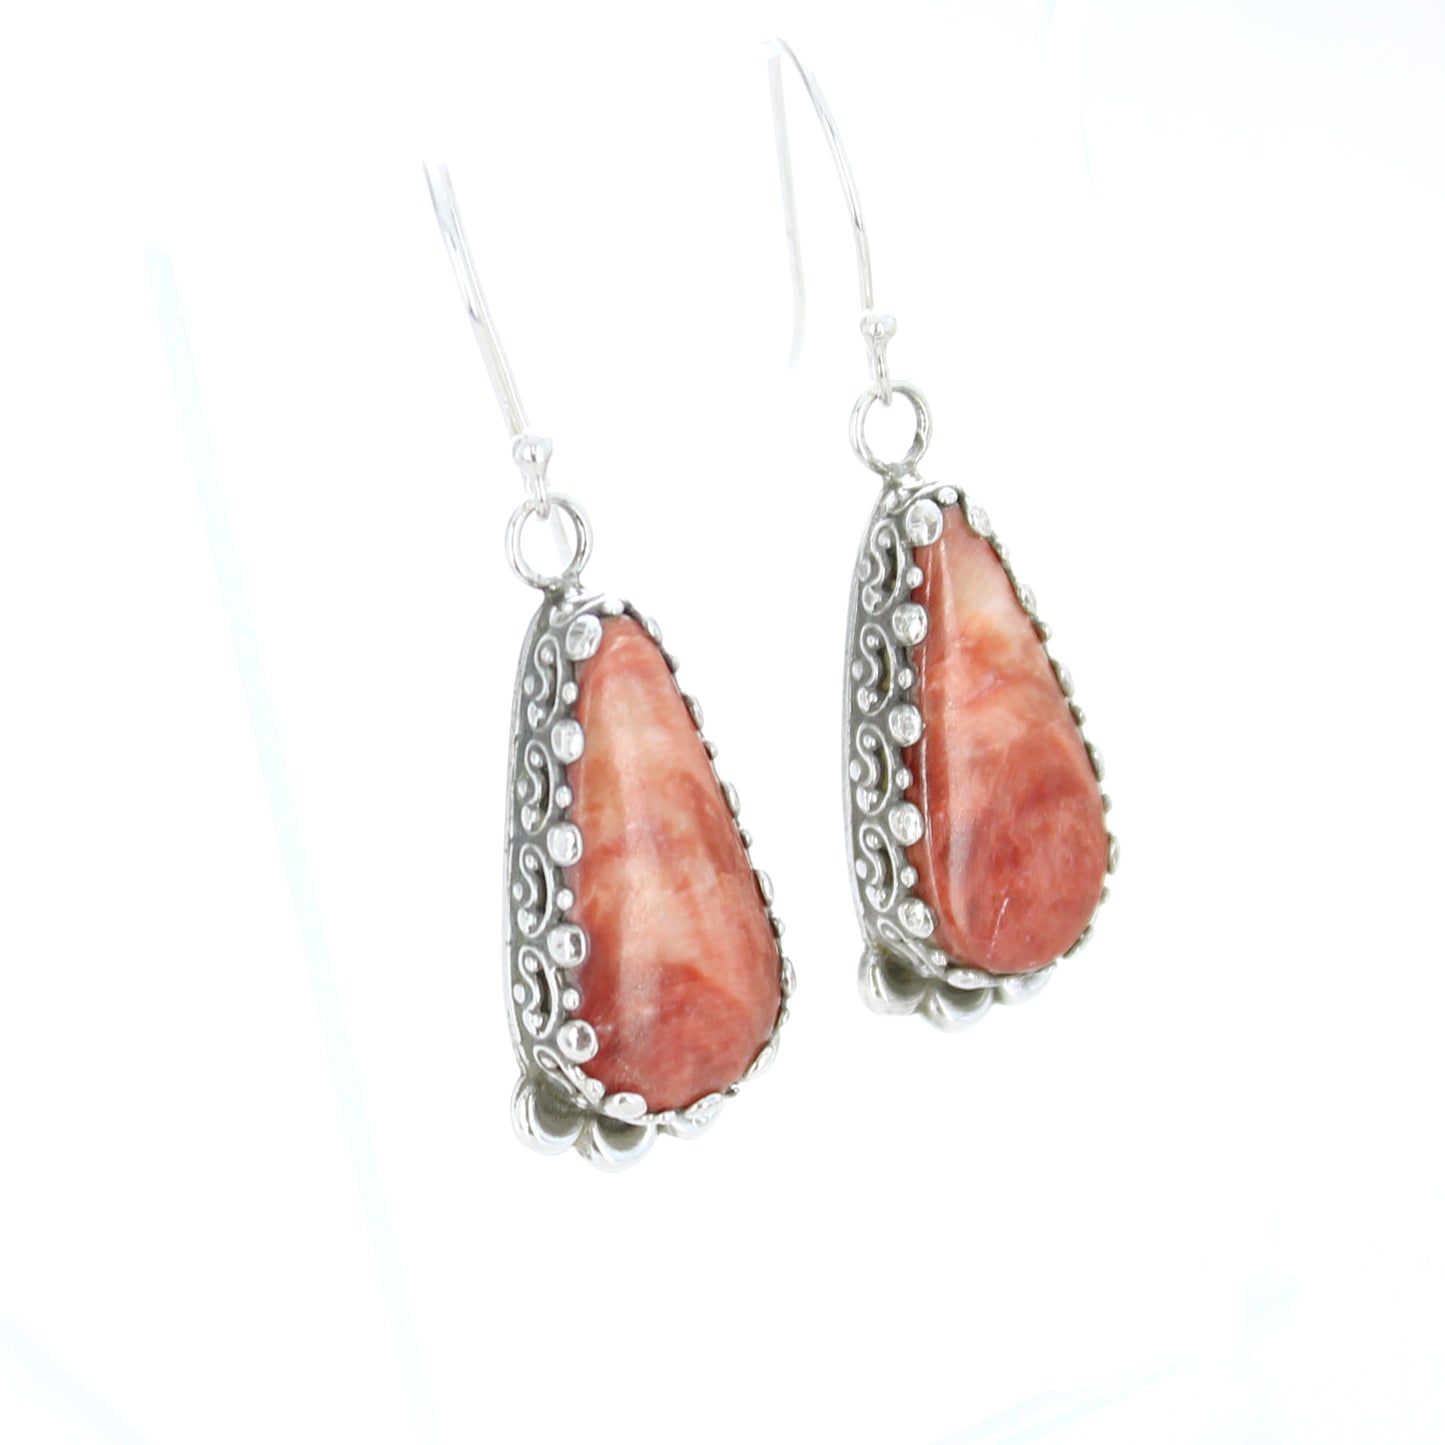 Spiny Oyster Earrings Long Teardrops with Moon Design Sterling